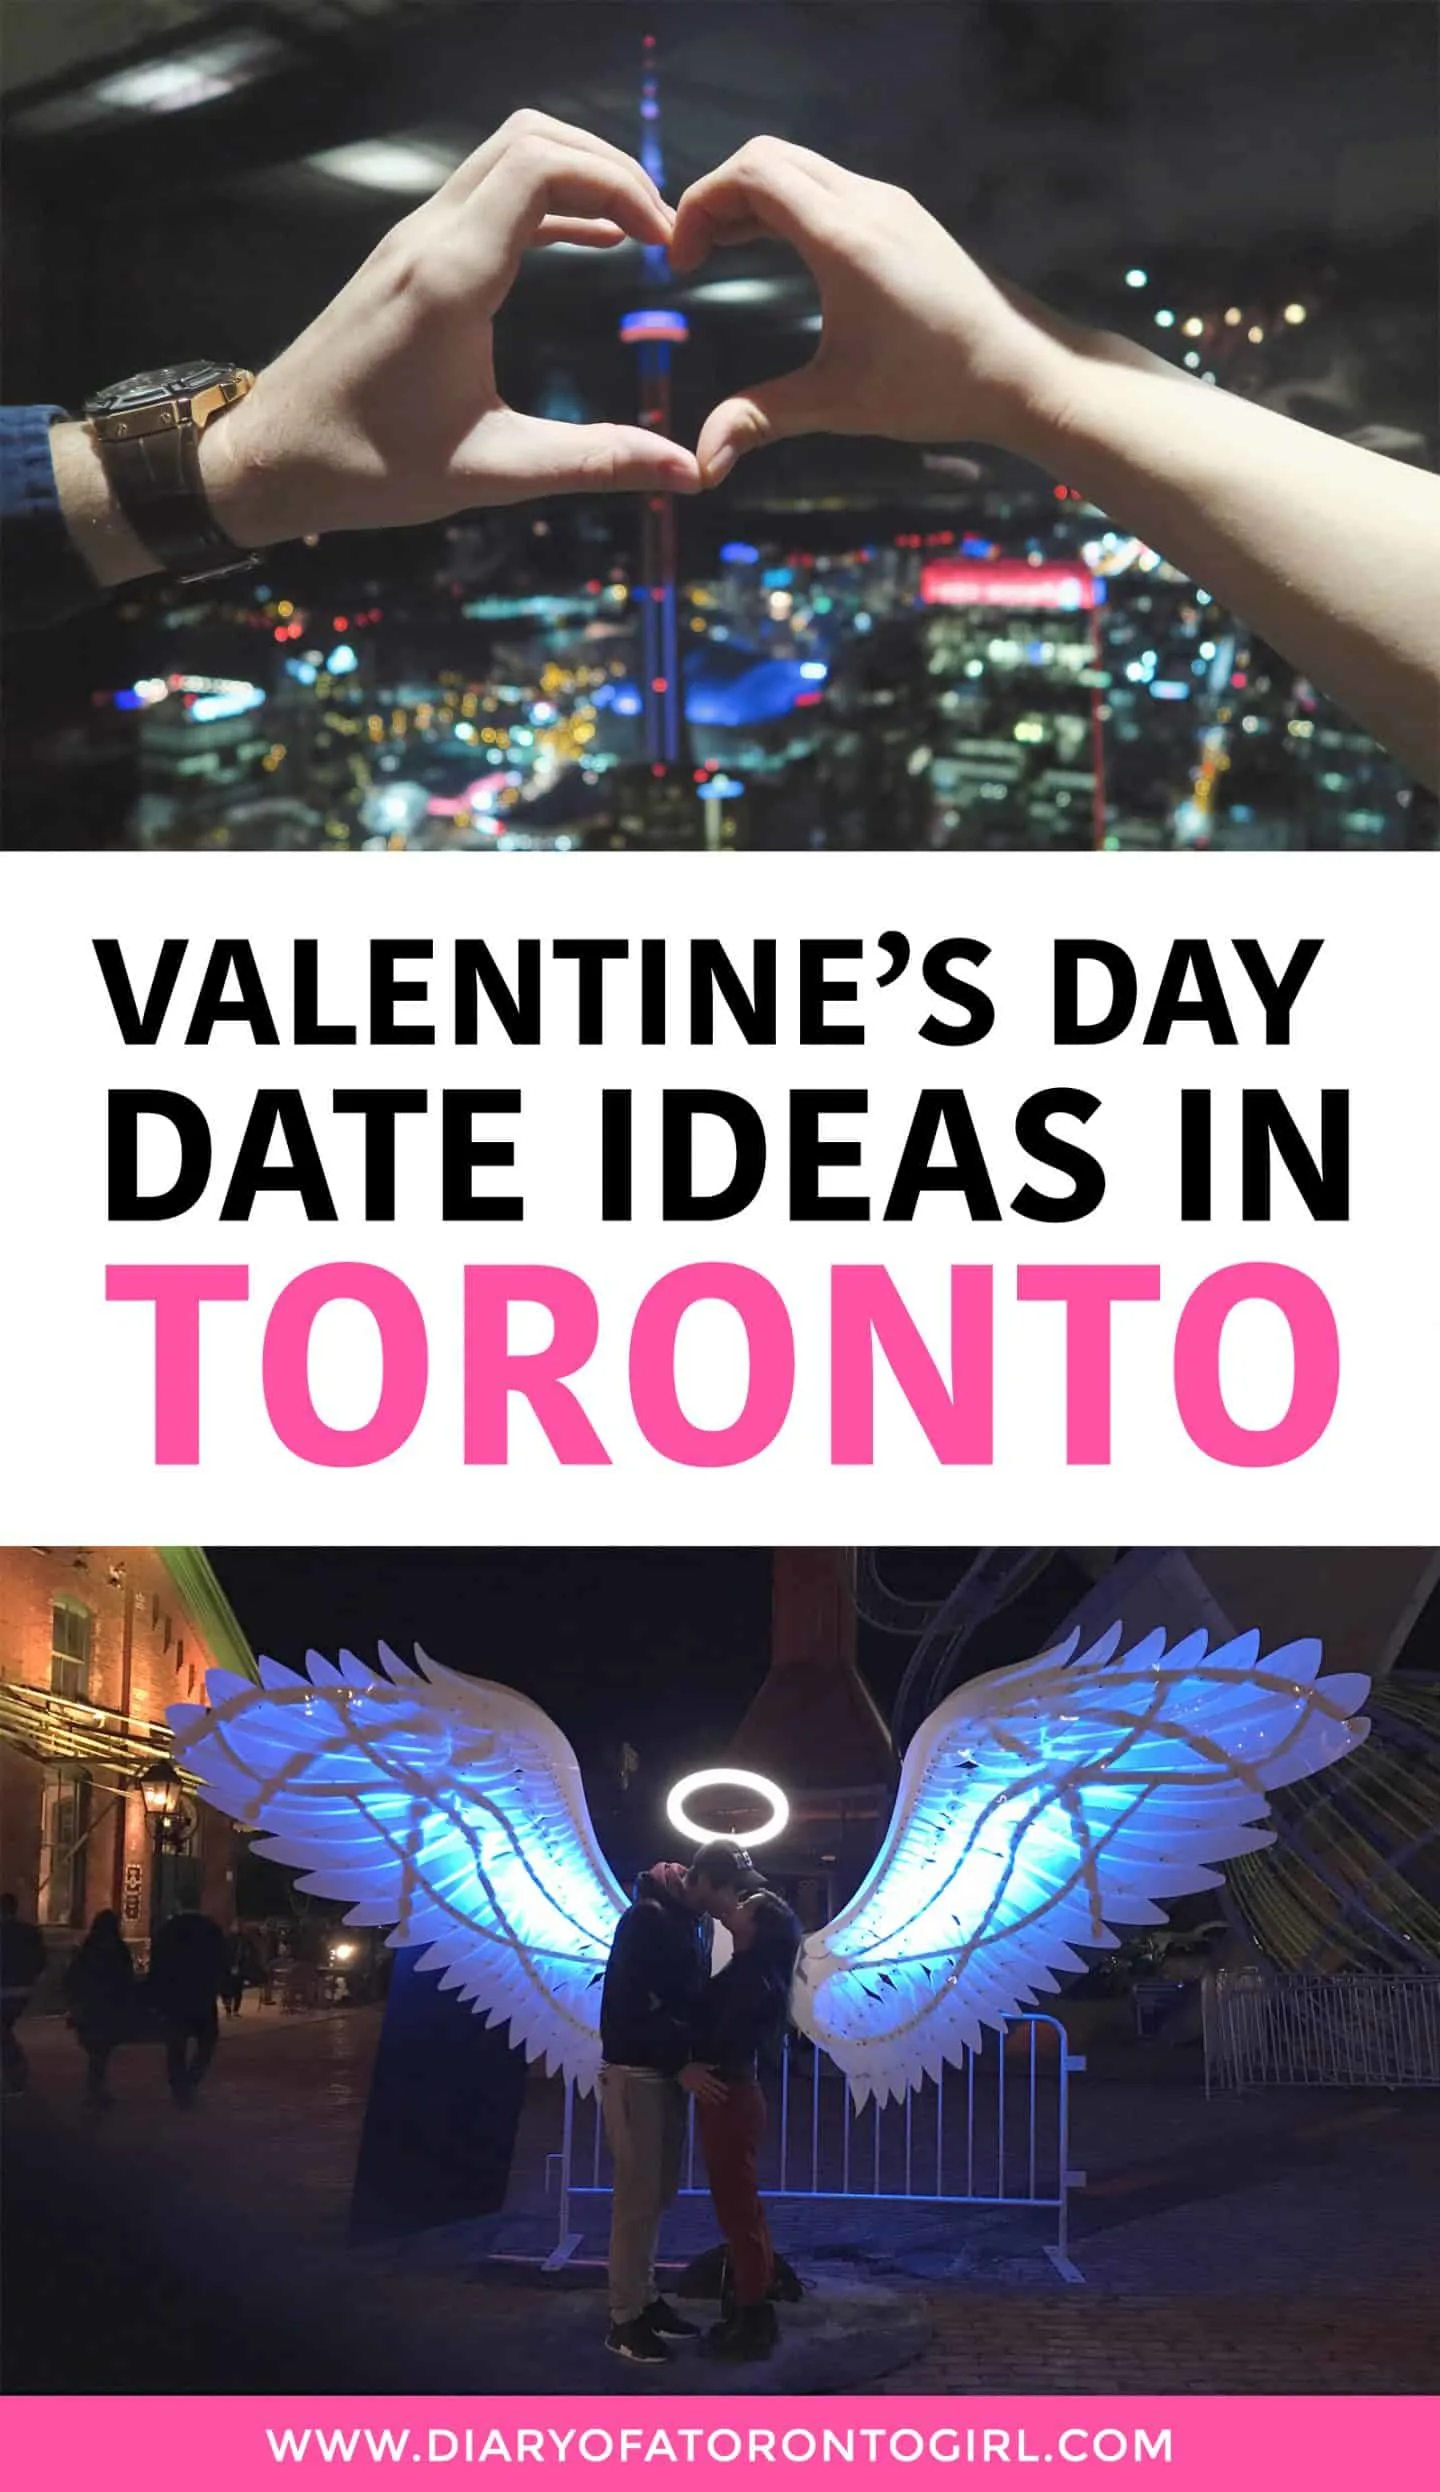 Cute things to do on Valentine's Day in Toronto, whether you're looking for day date ideas or a romantic date night out!